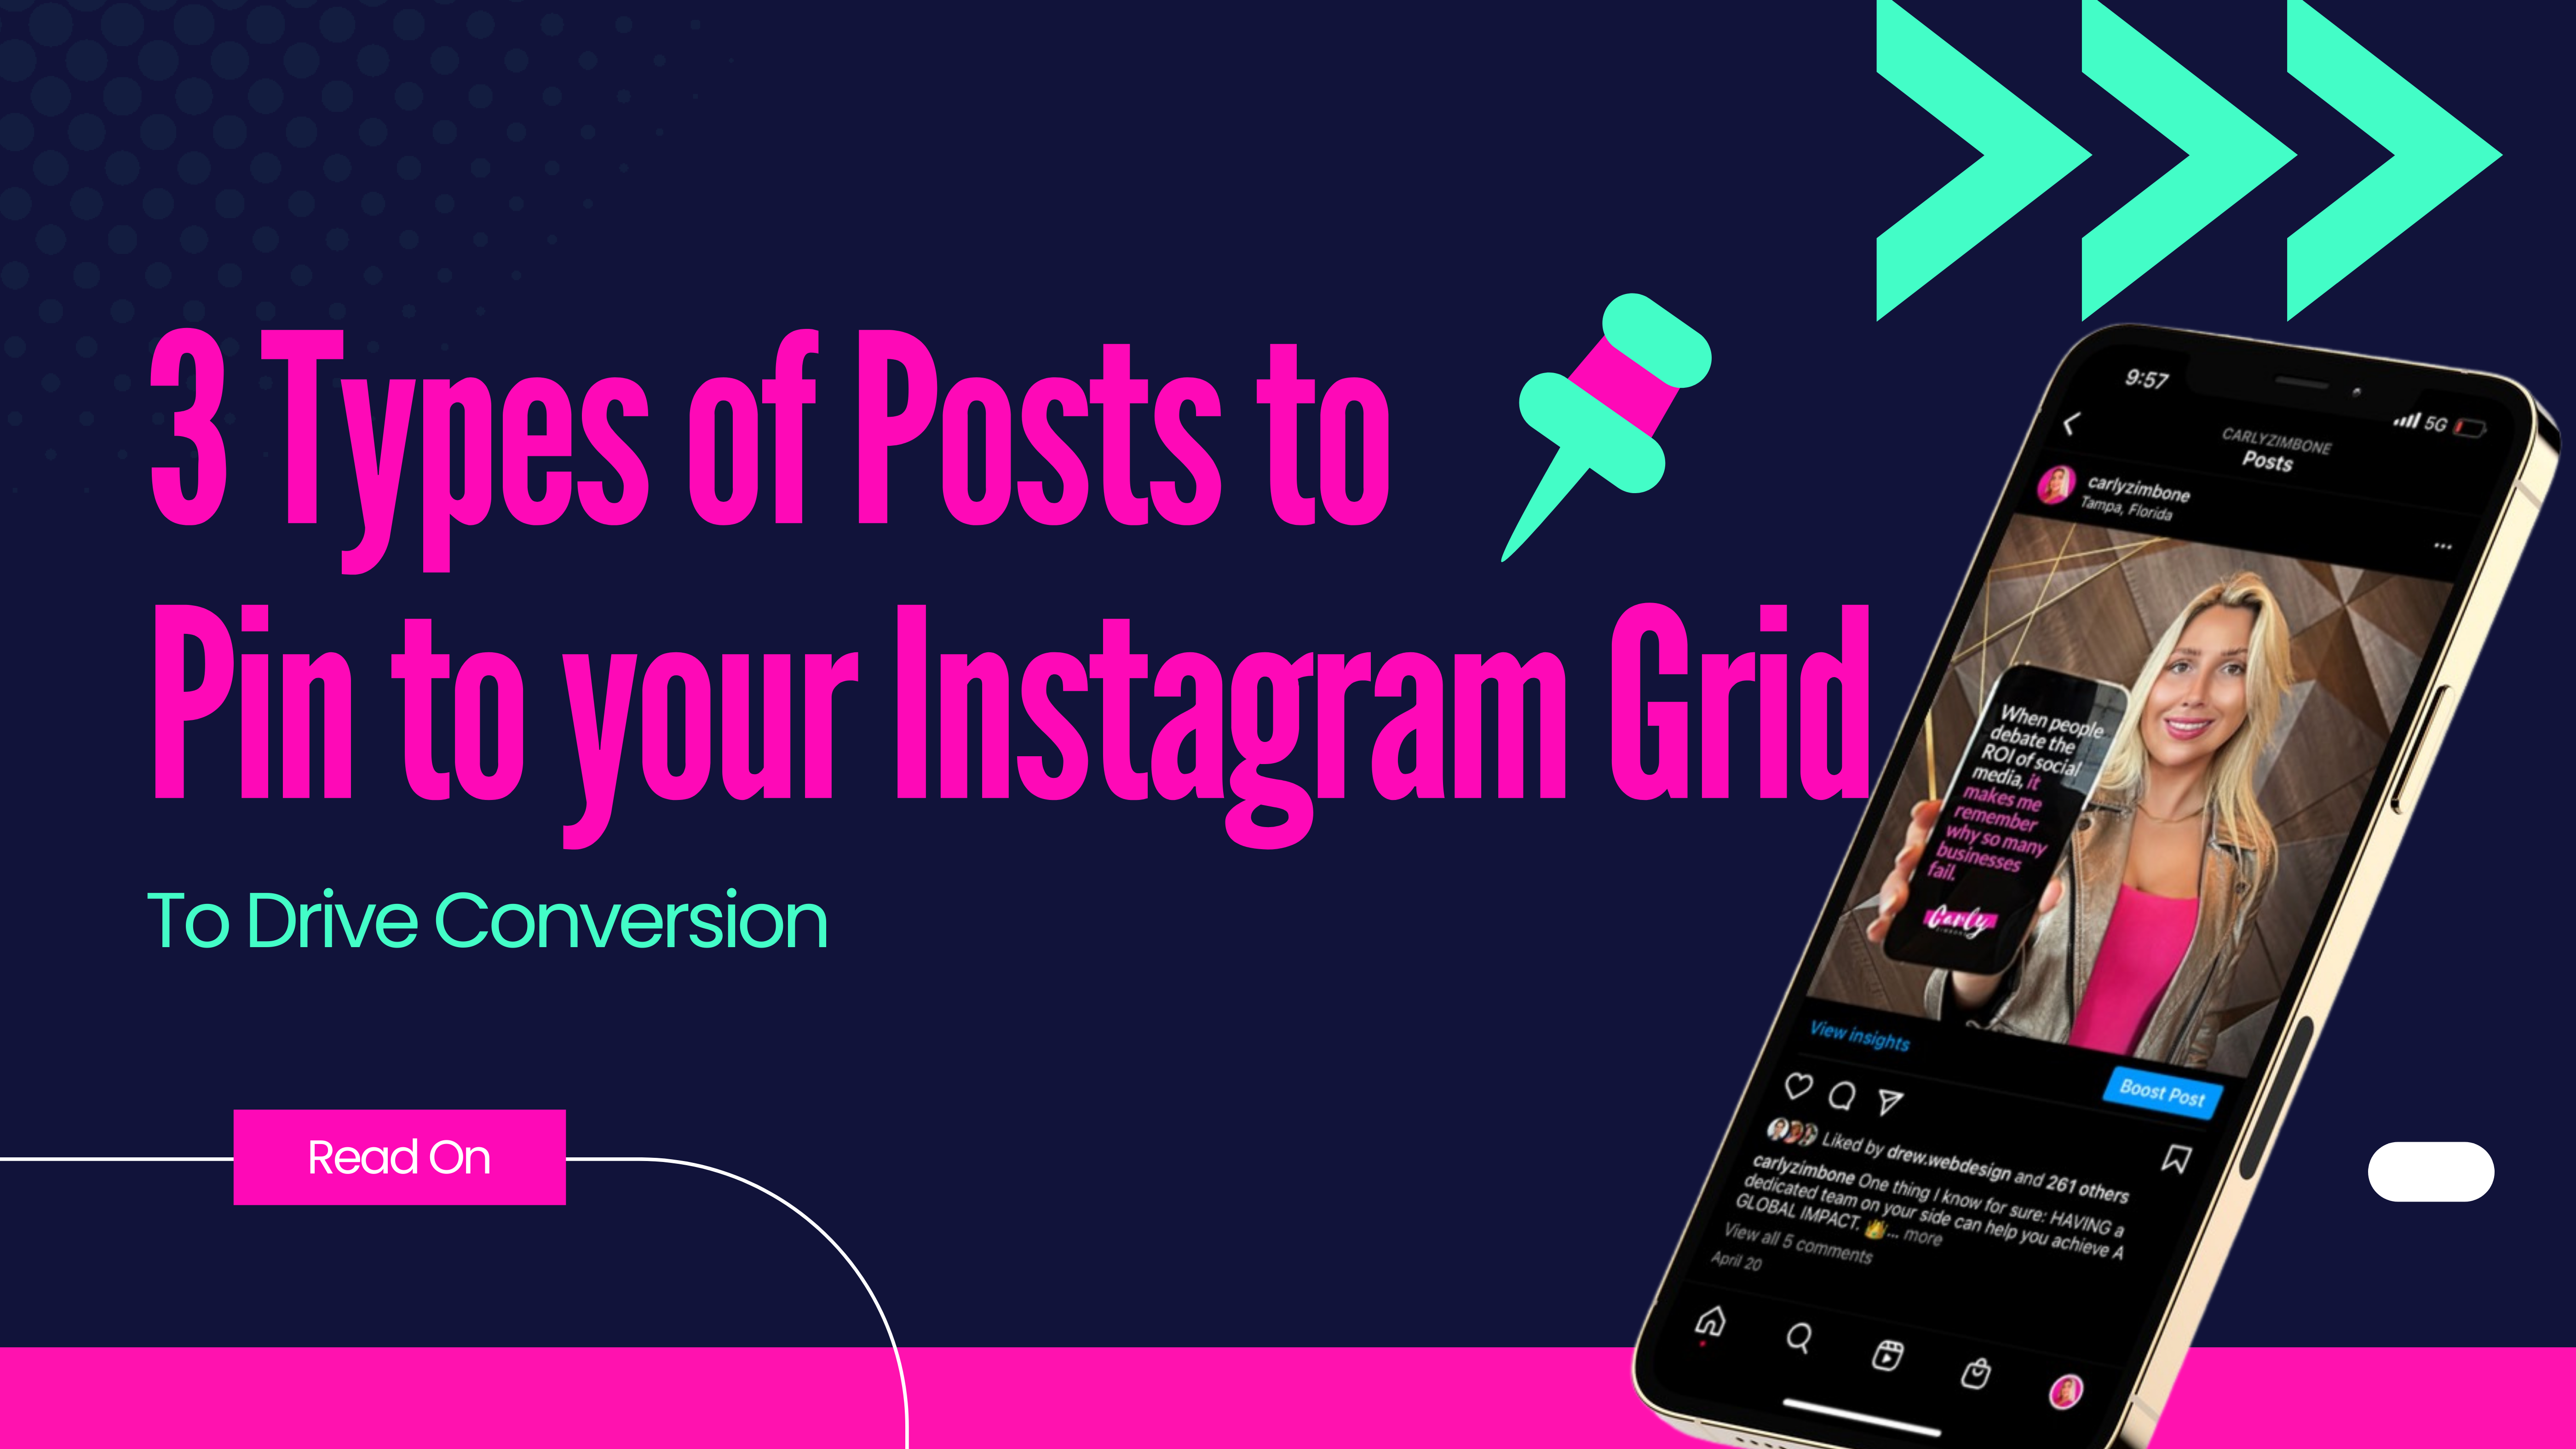 Three types of post to pin on your Instagram grid